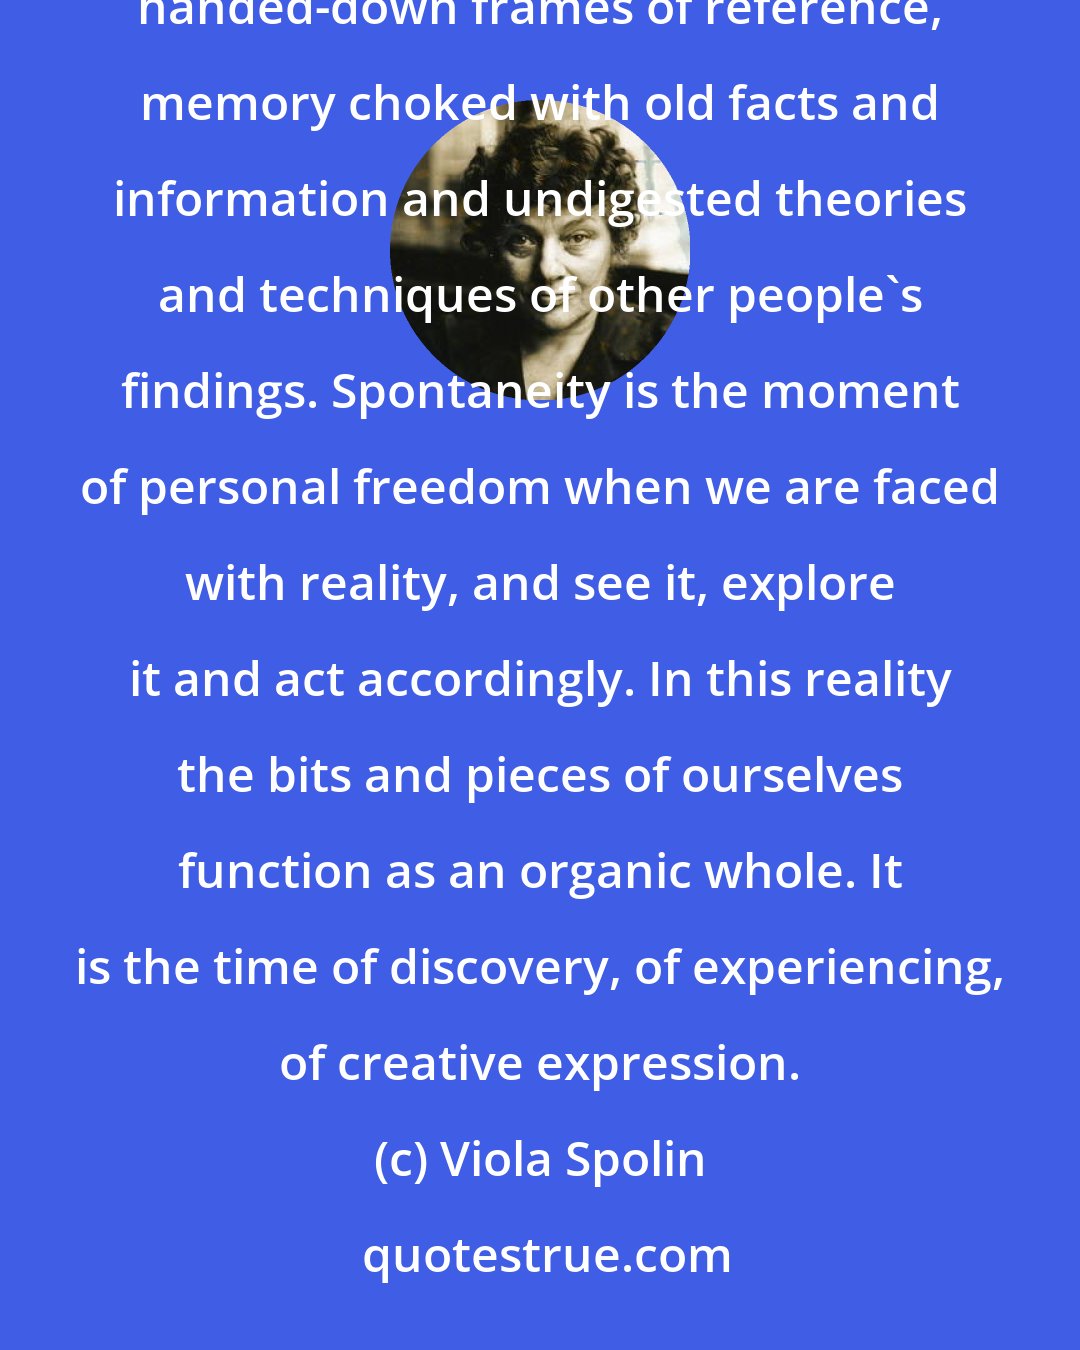 Viola Spolin: Through spontaneity we are re-formed into ourselves. It creates an explosion that for the moment frees us from handed-down frames of reference, memory choked with old facts and information and undigested theories and techniques of other people's findings. Spontaneity is the moment of personal freedom when we are faced with reality, and see it, explore it and act accordingly. In this reality the bits and pieces of ourselves function as an organic whole. It is the time of discovery, of experiencing, of creative expression.